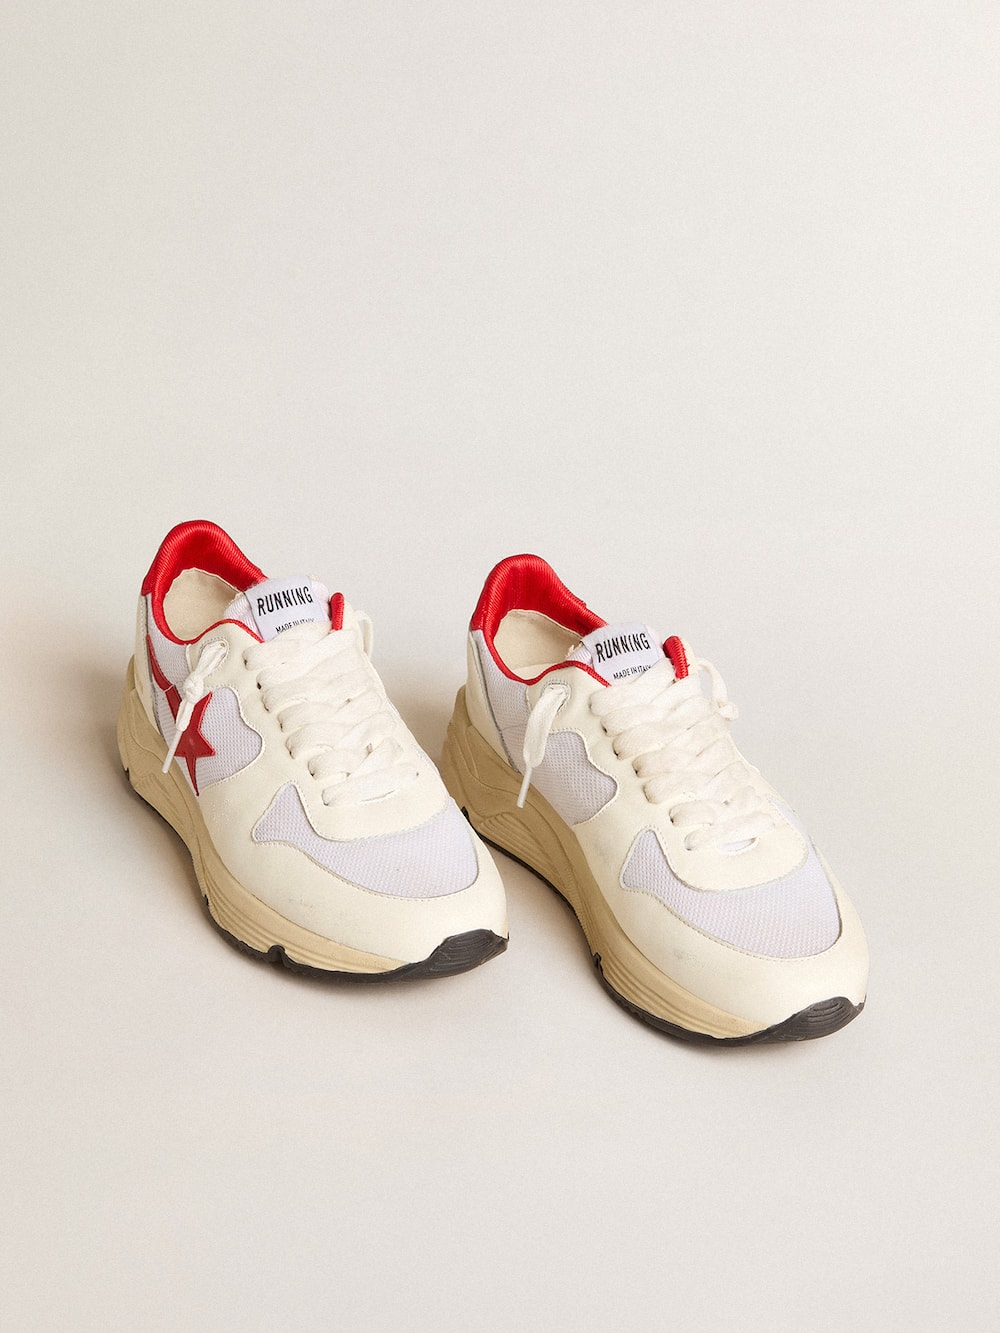 Golden Goose - Running Sole LTD in white nappa and nylon with a red leather star in 